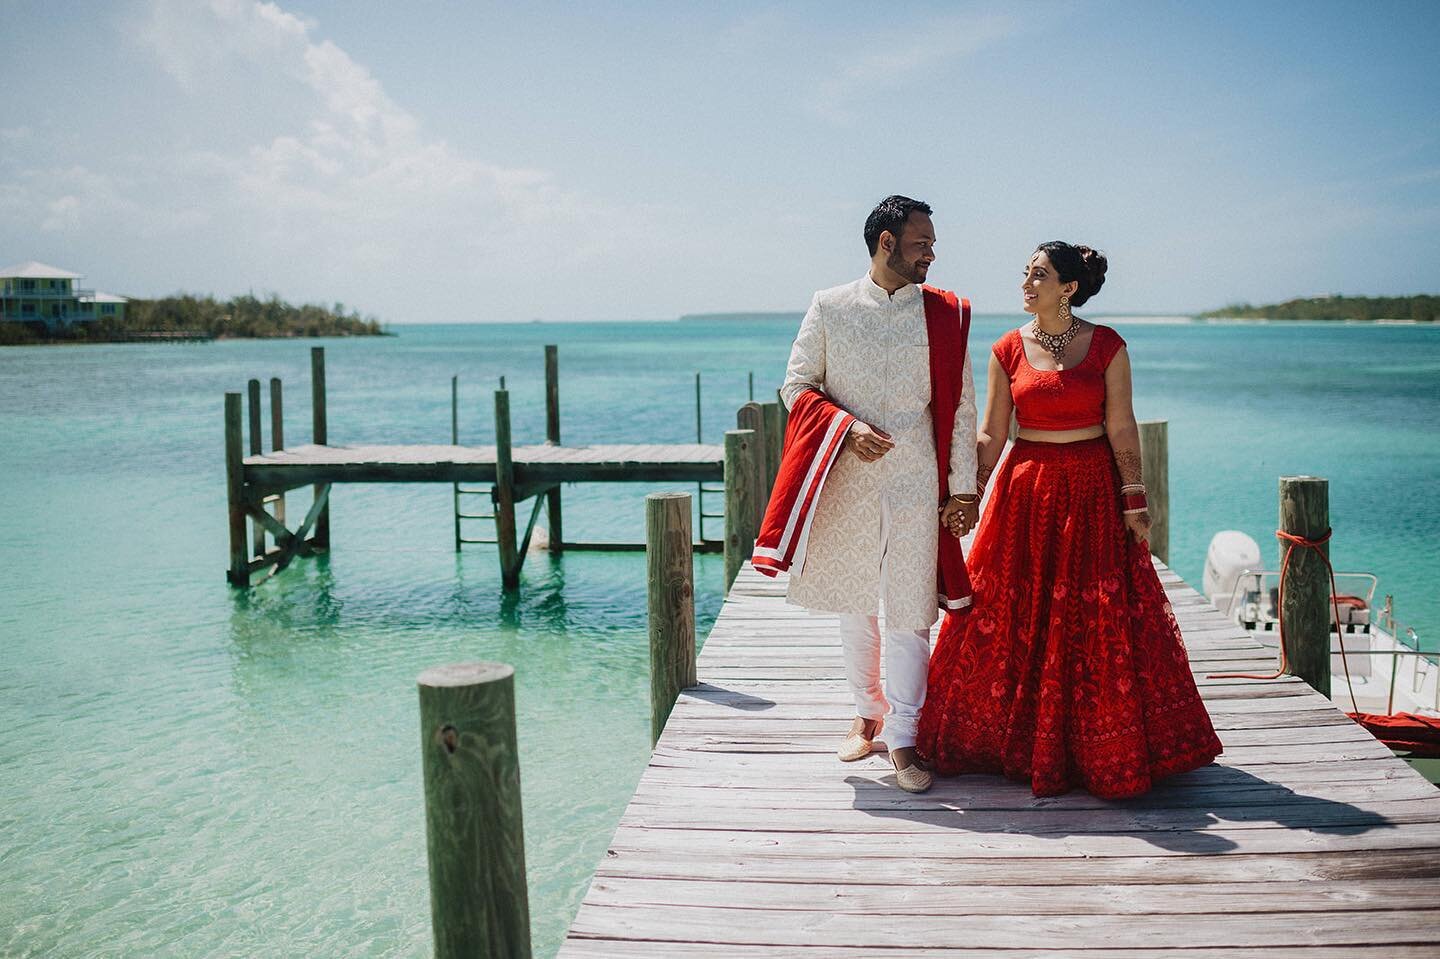 Love the contrast of the red dress against the turquoise water!